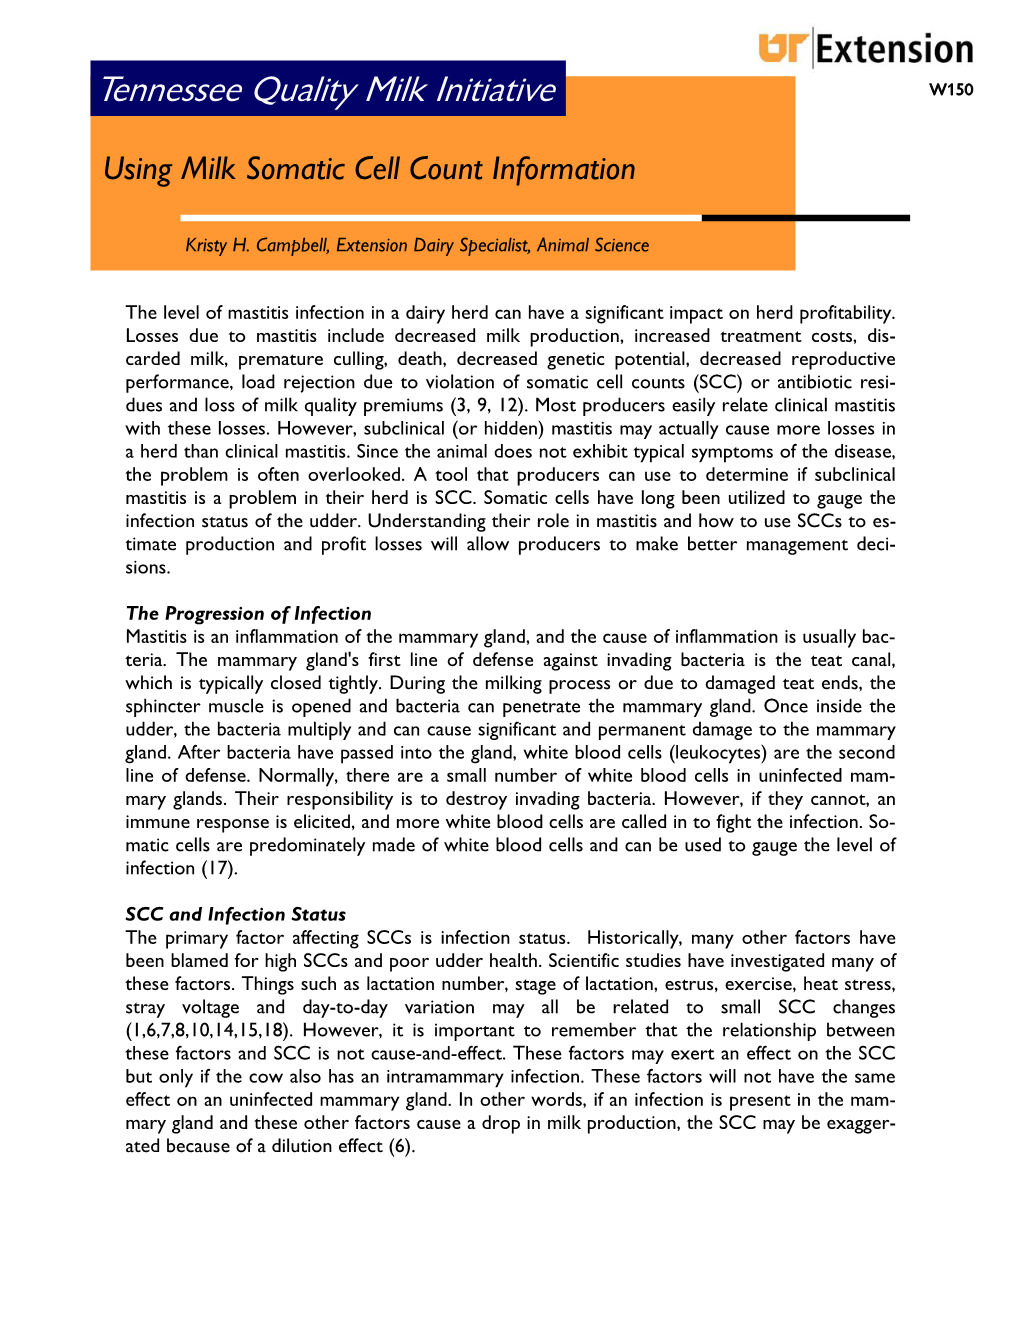 Using Milk Somatic Cell Count Information